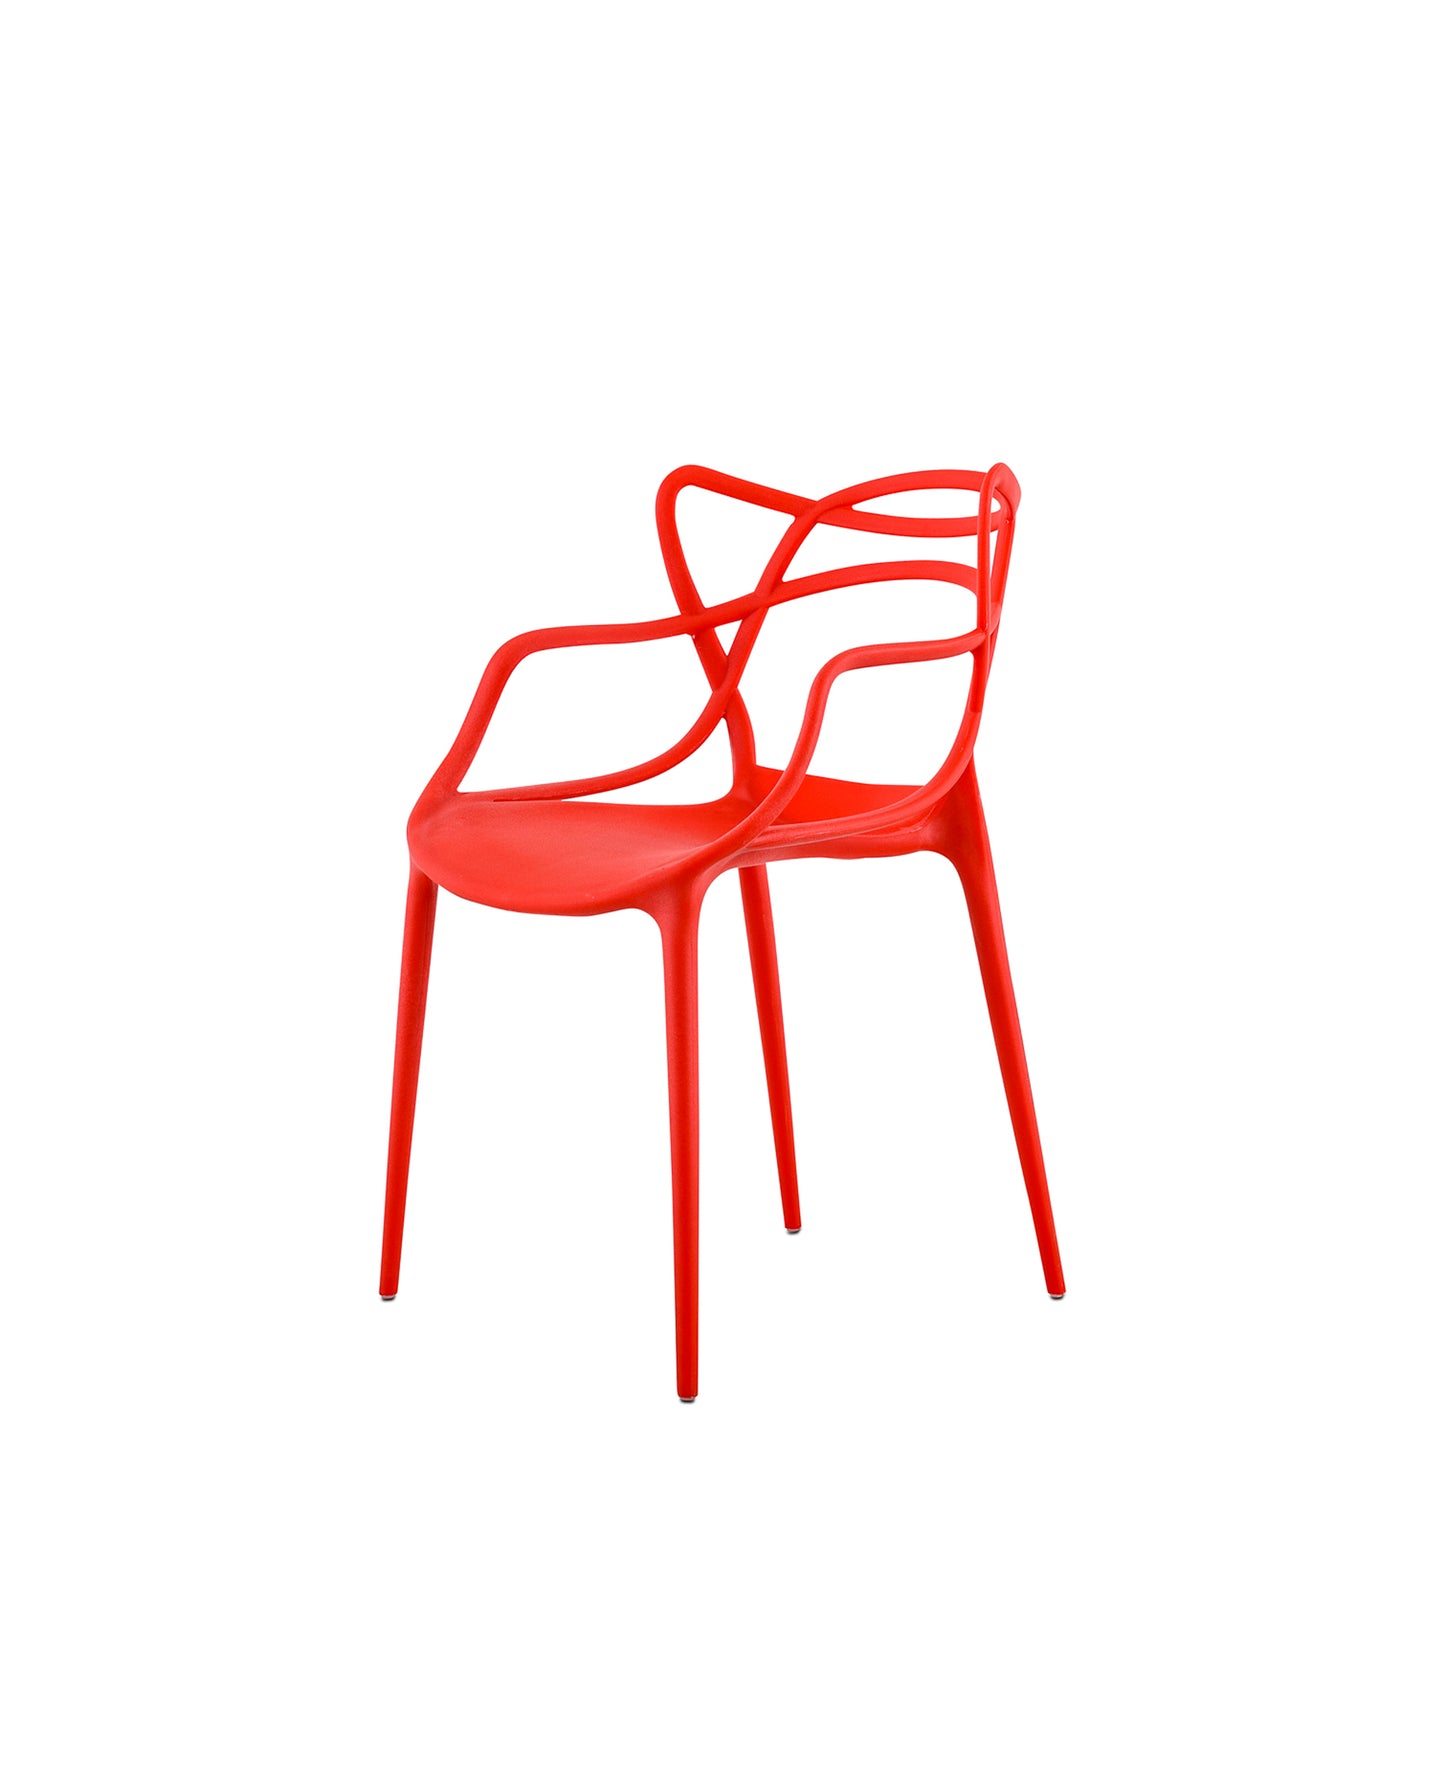 Urban Decor Seattle Squiggle Chair Red MWCH6